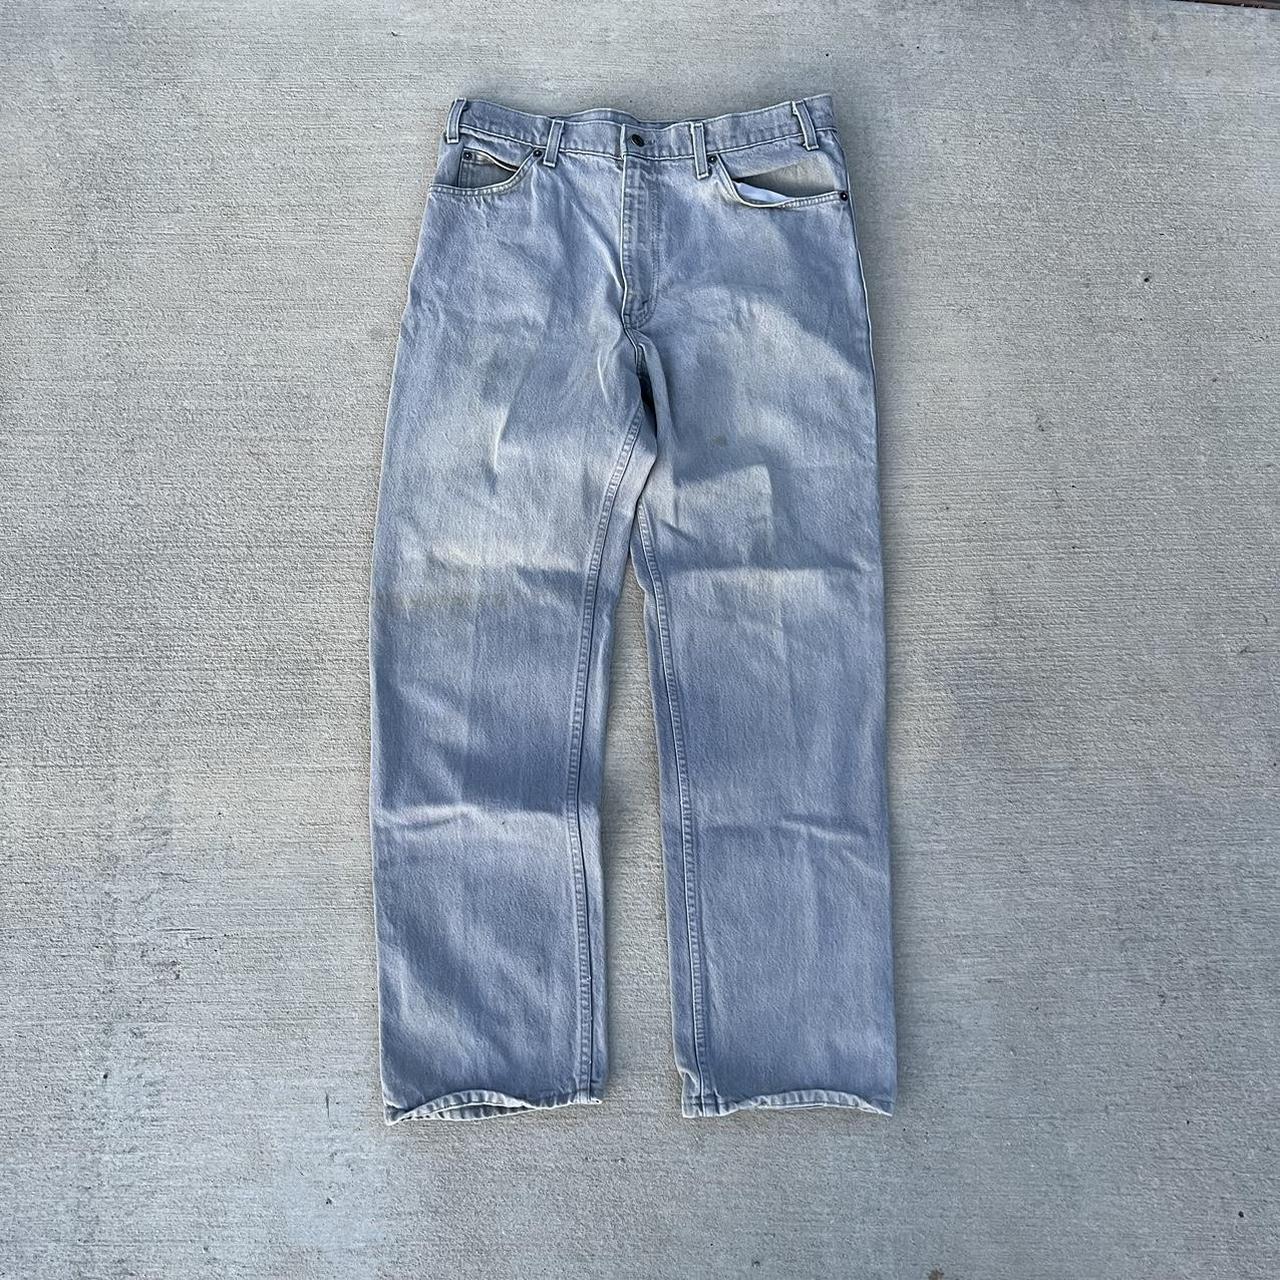 Vintage Gray Levi’s Jeans Size 36x32” In great... - Depop